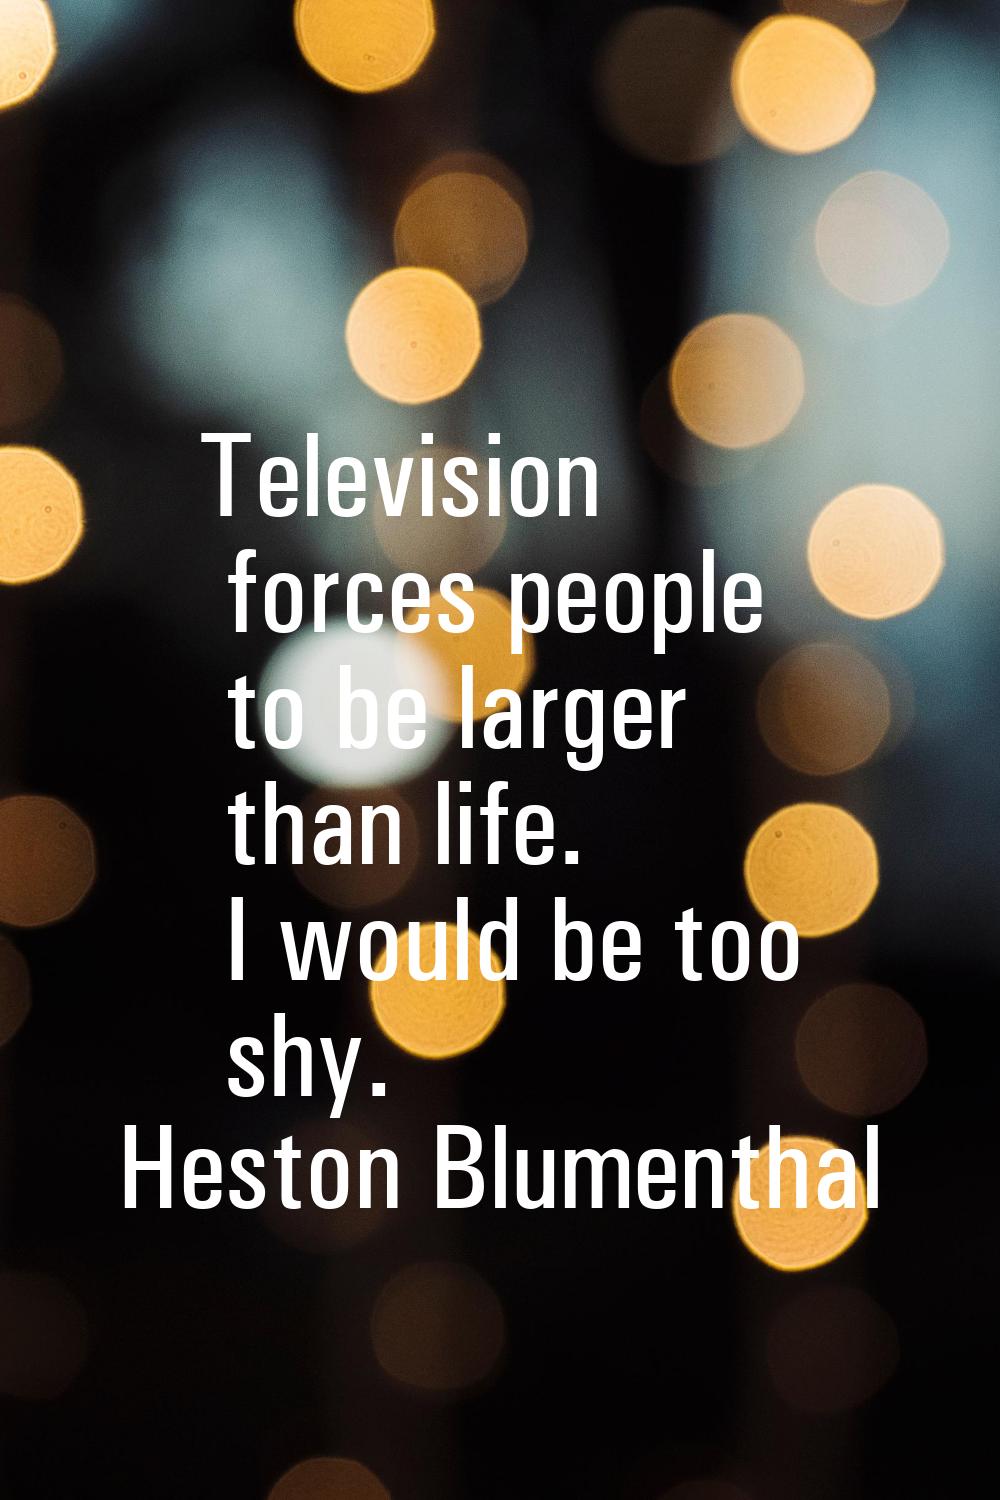 Television forces people to be larger than life. I would be too shy.